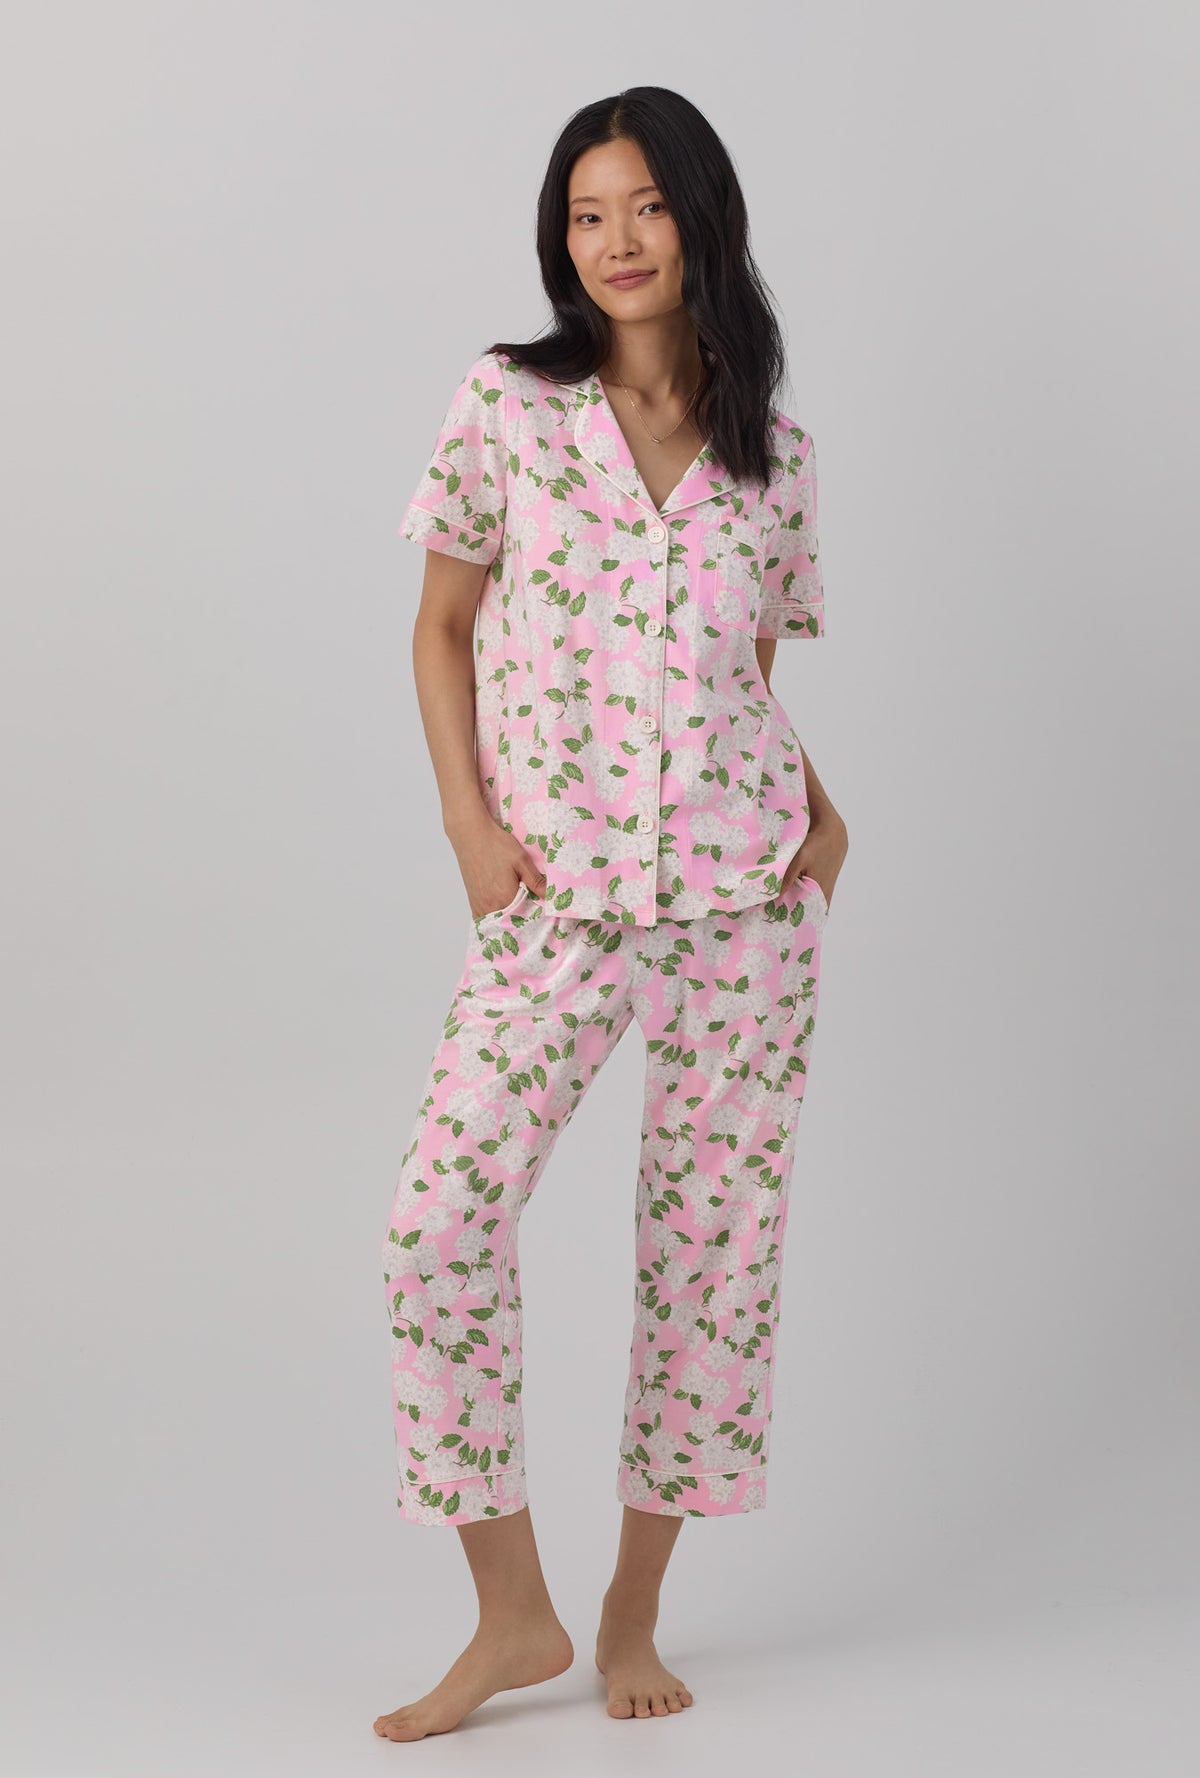 A lady wearing pink Hydrangea Short Sleeve Classic Stretch Jersey Cropped PJ Set with Pink Summer print.